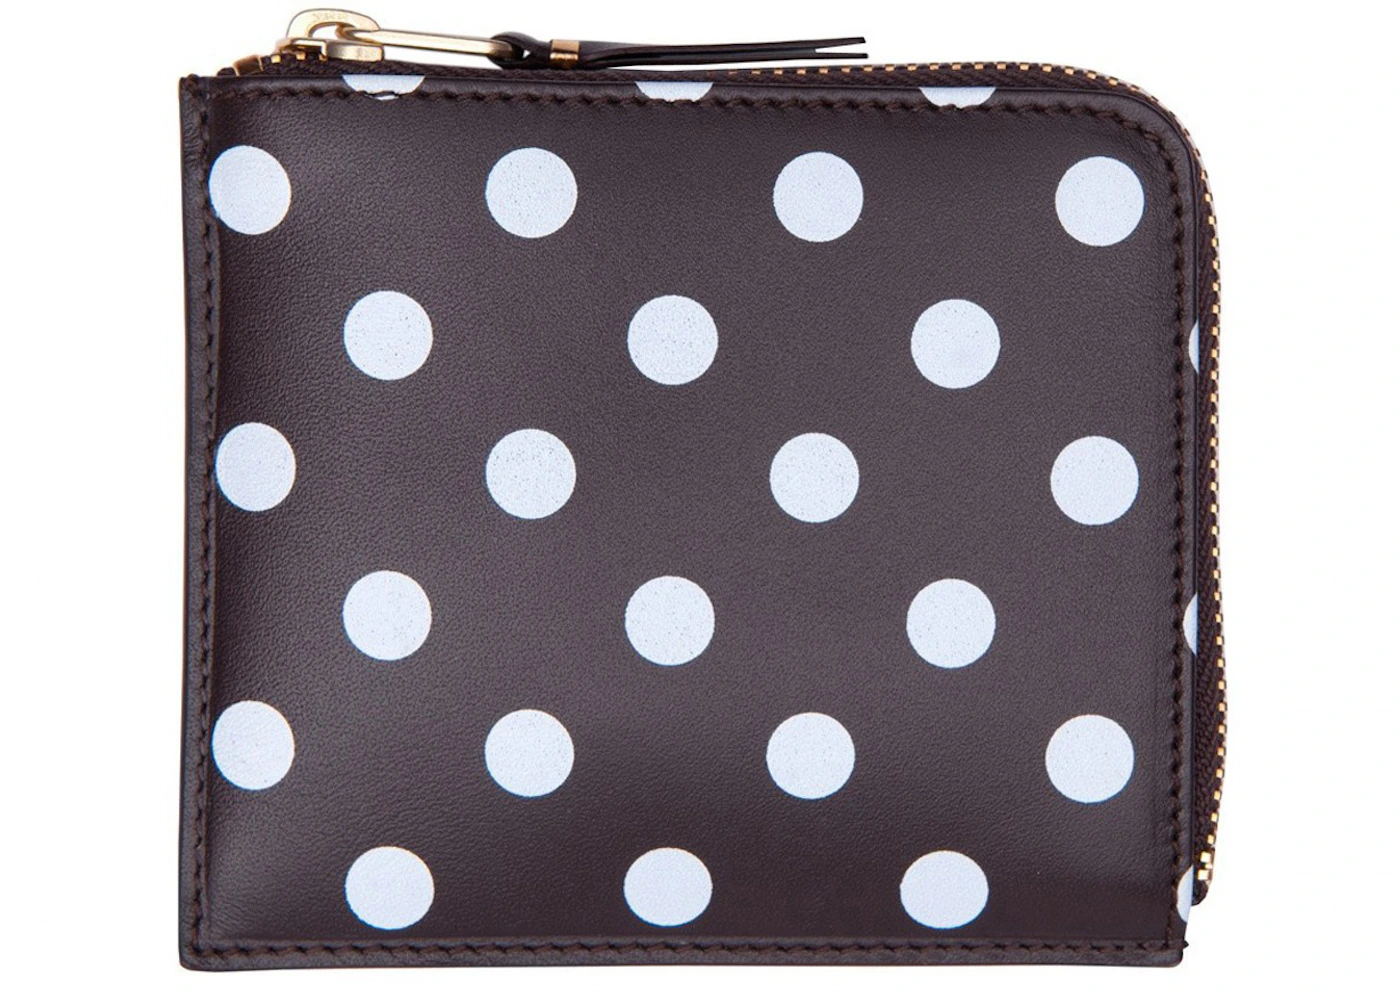 Comme des Garcons SA3100PD Wallet Polka Dots Brown in Leather with Gold ...